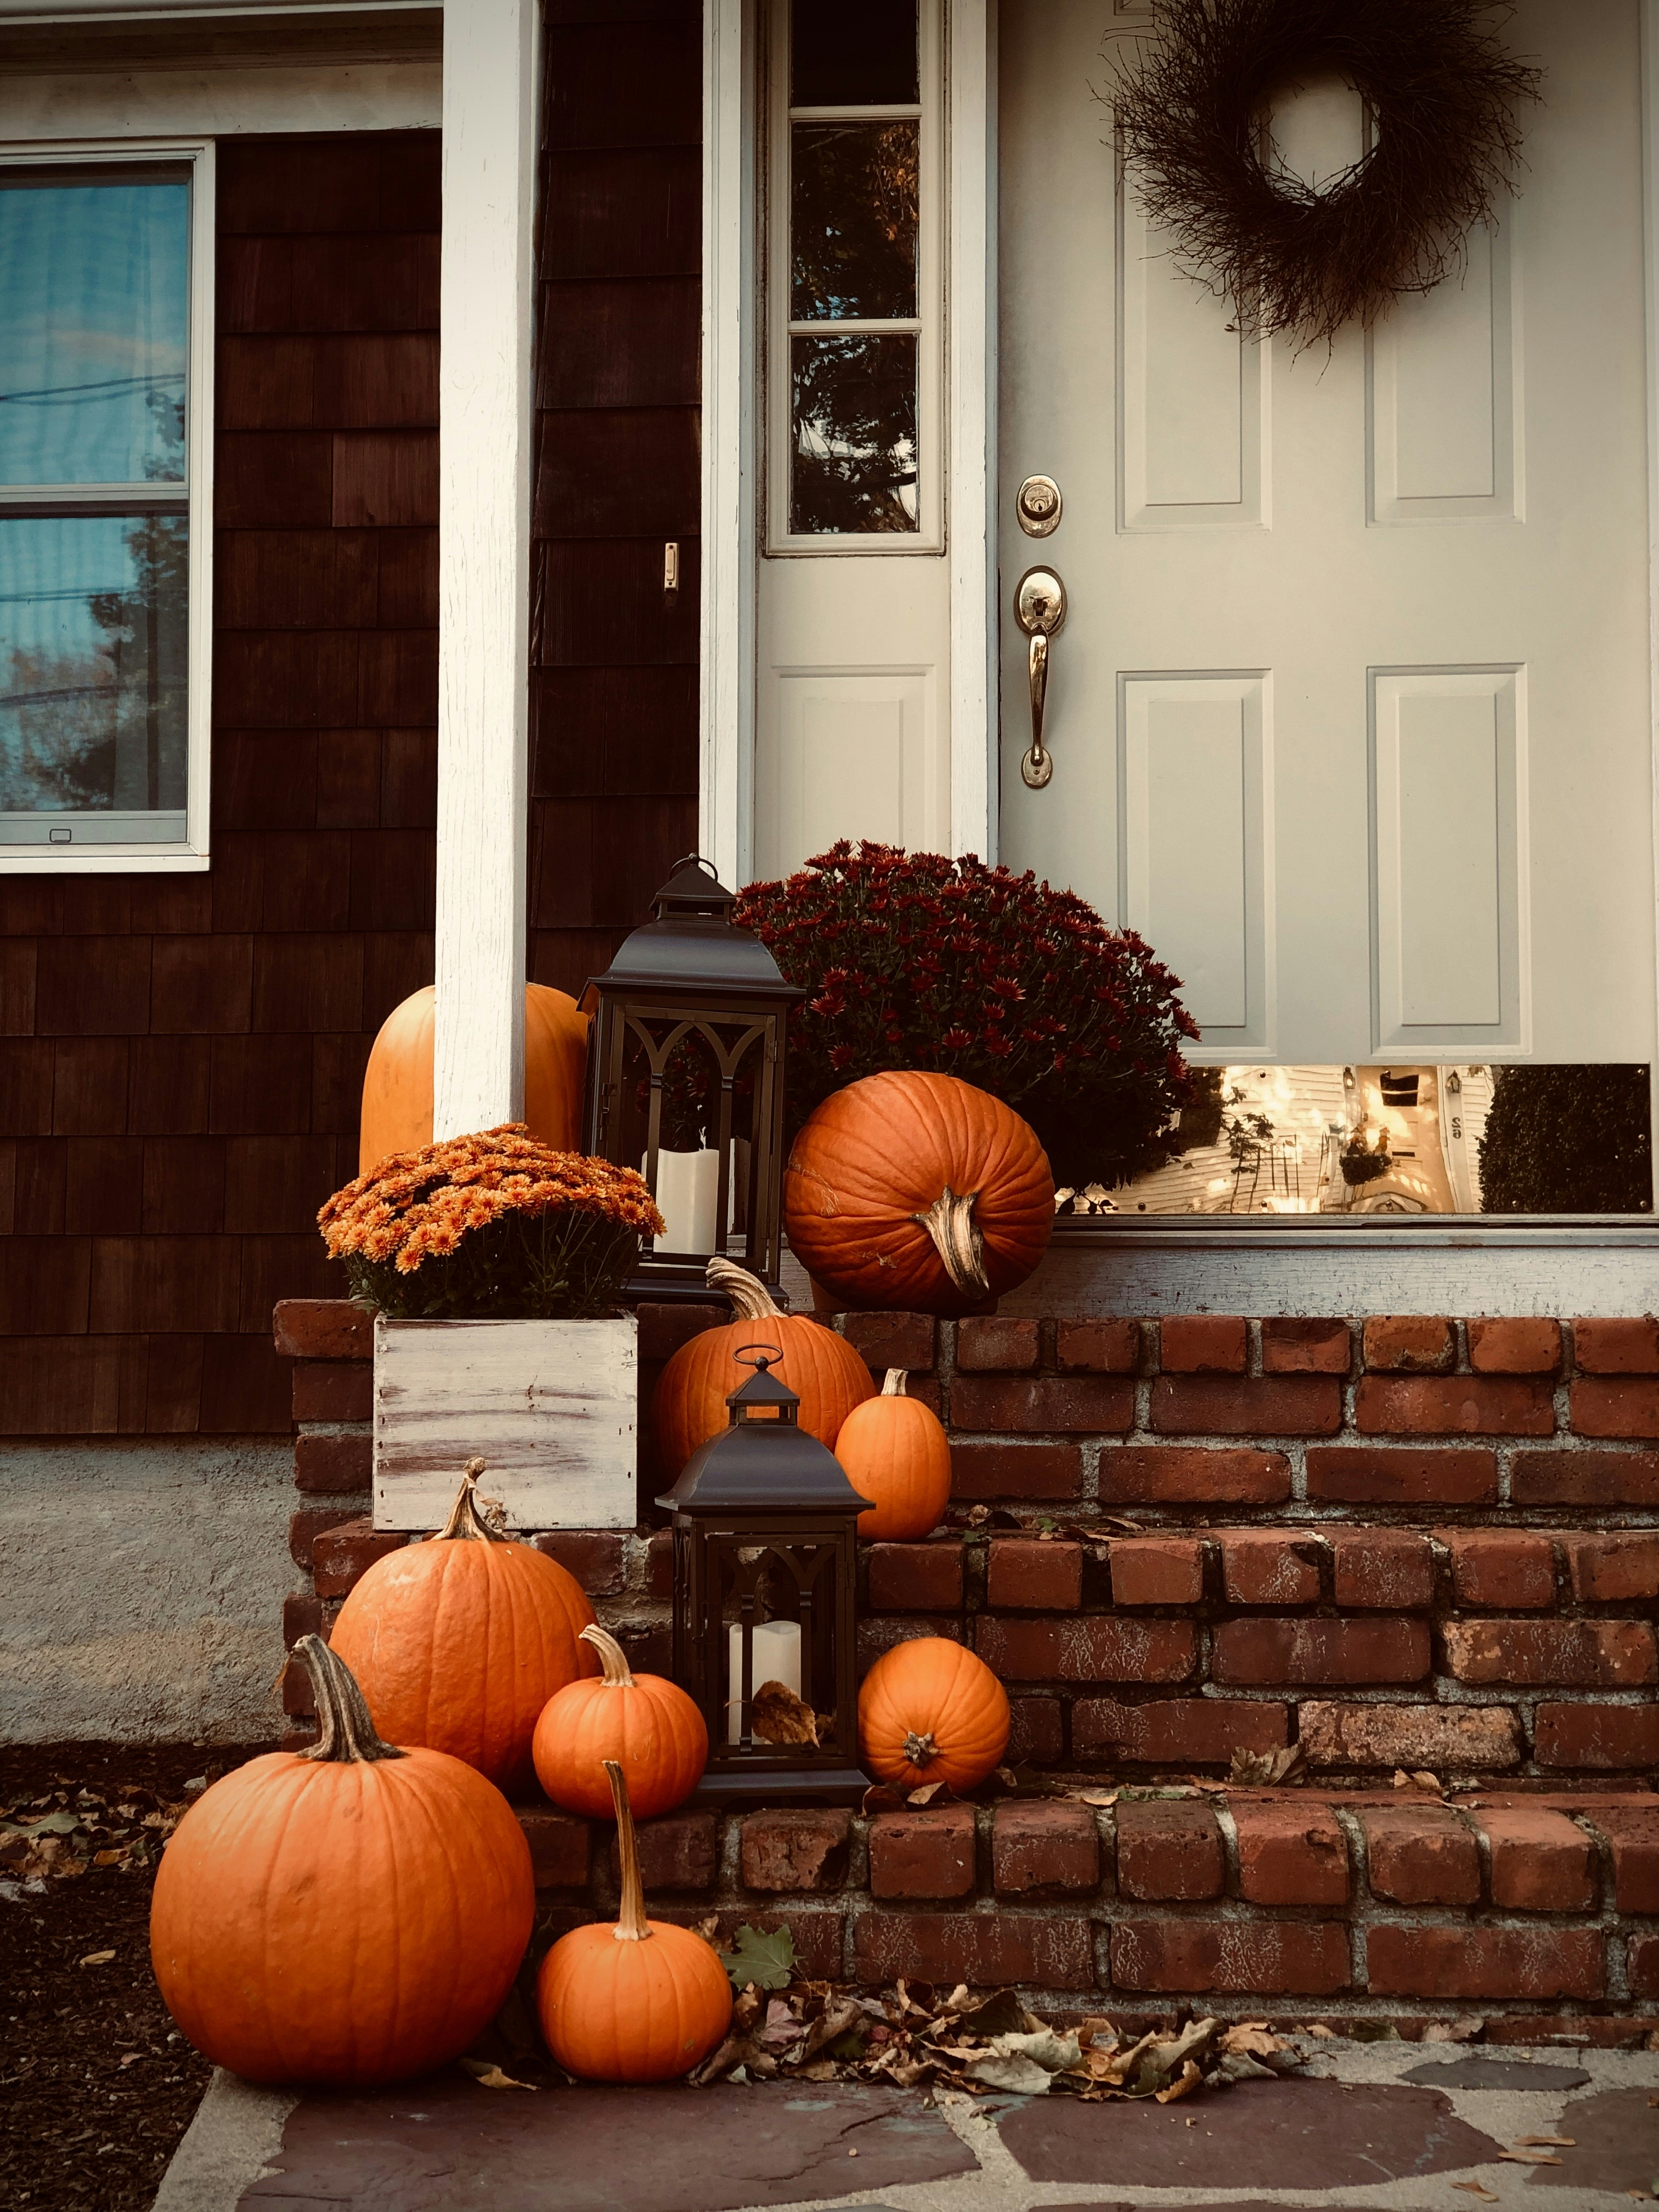 Our front porch, decorated with lanterns, pumpkins and colorful mums for the fall season. Rhode Island, USA -- homes and decor like this are very common in New England/Northeastern United States